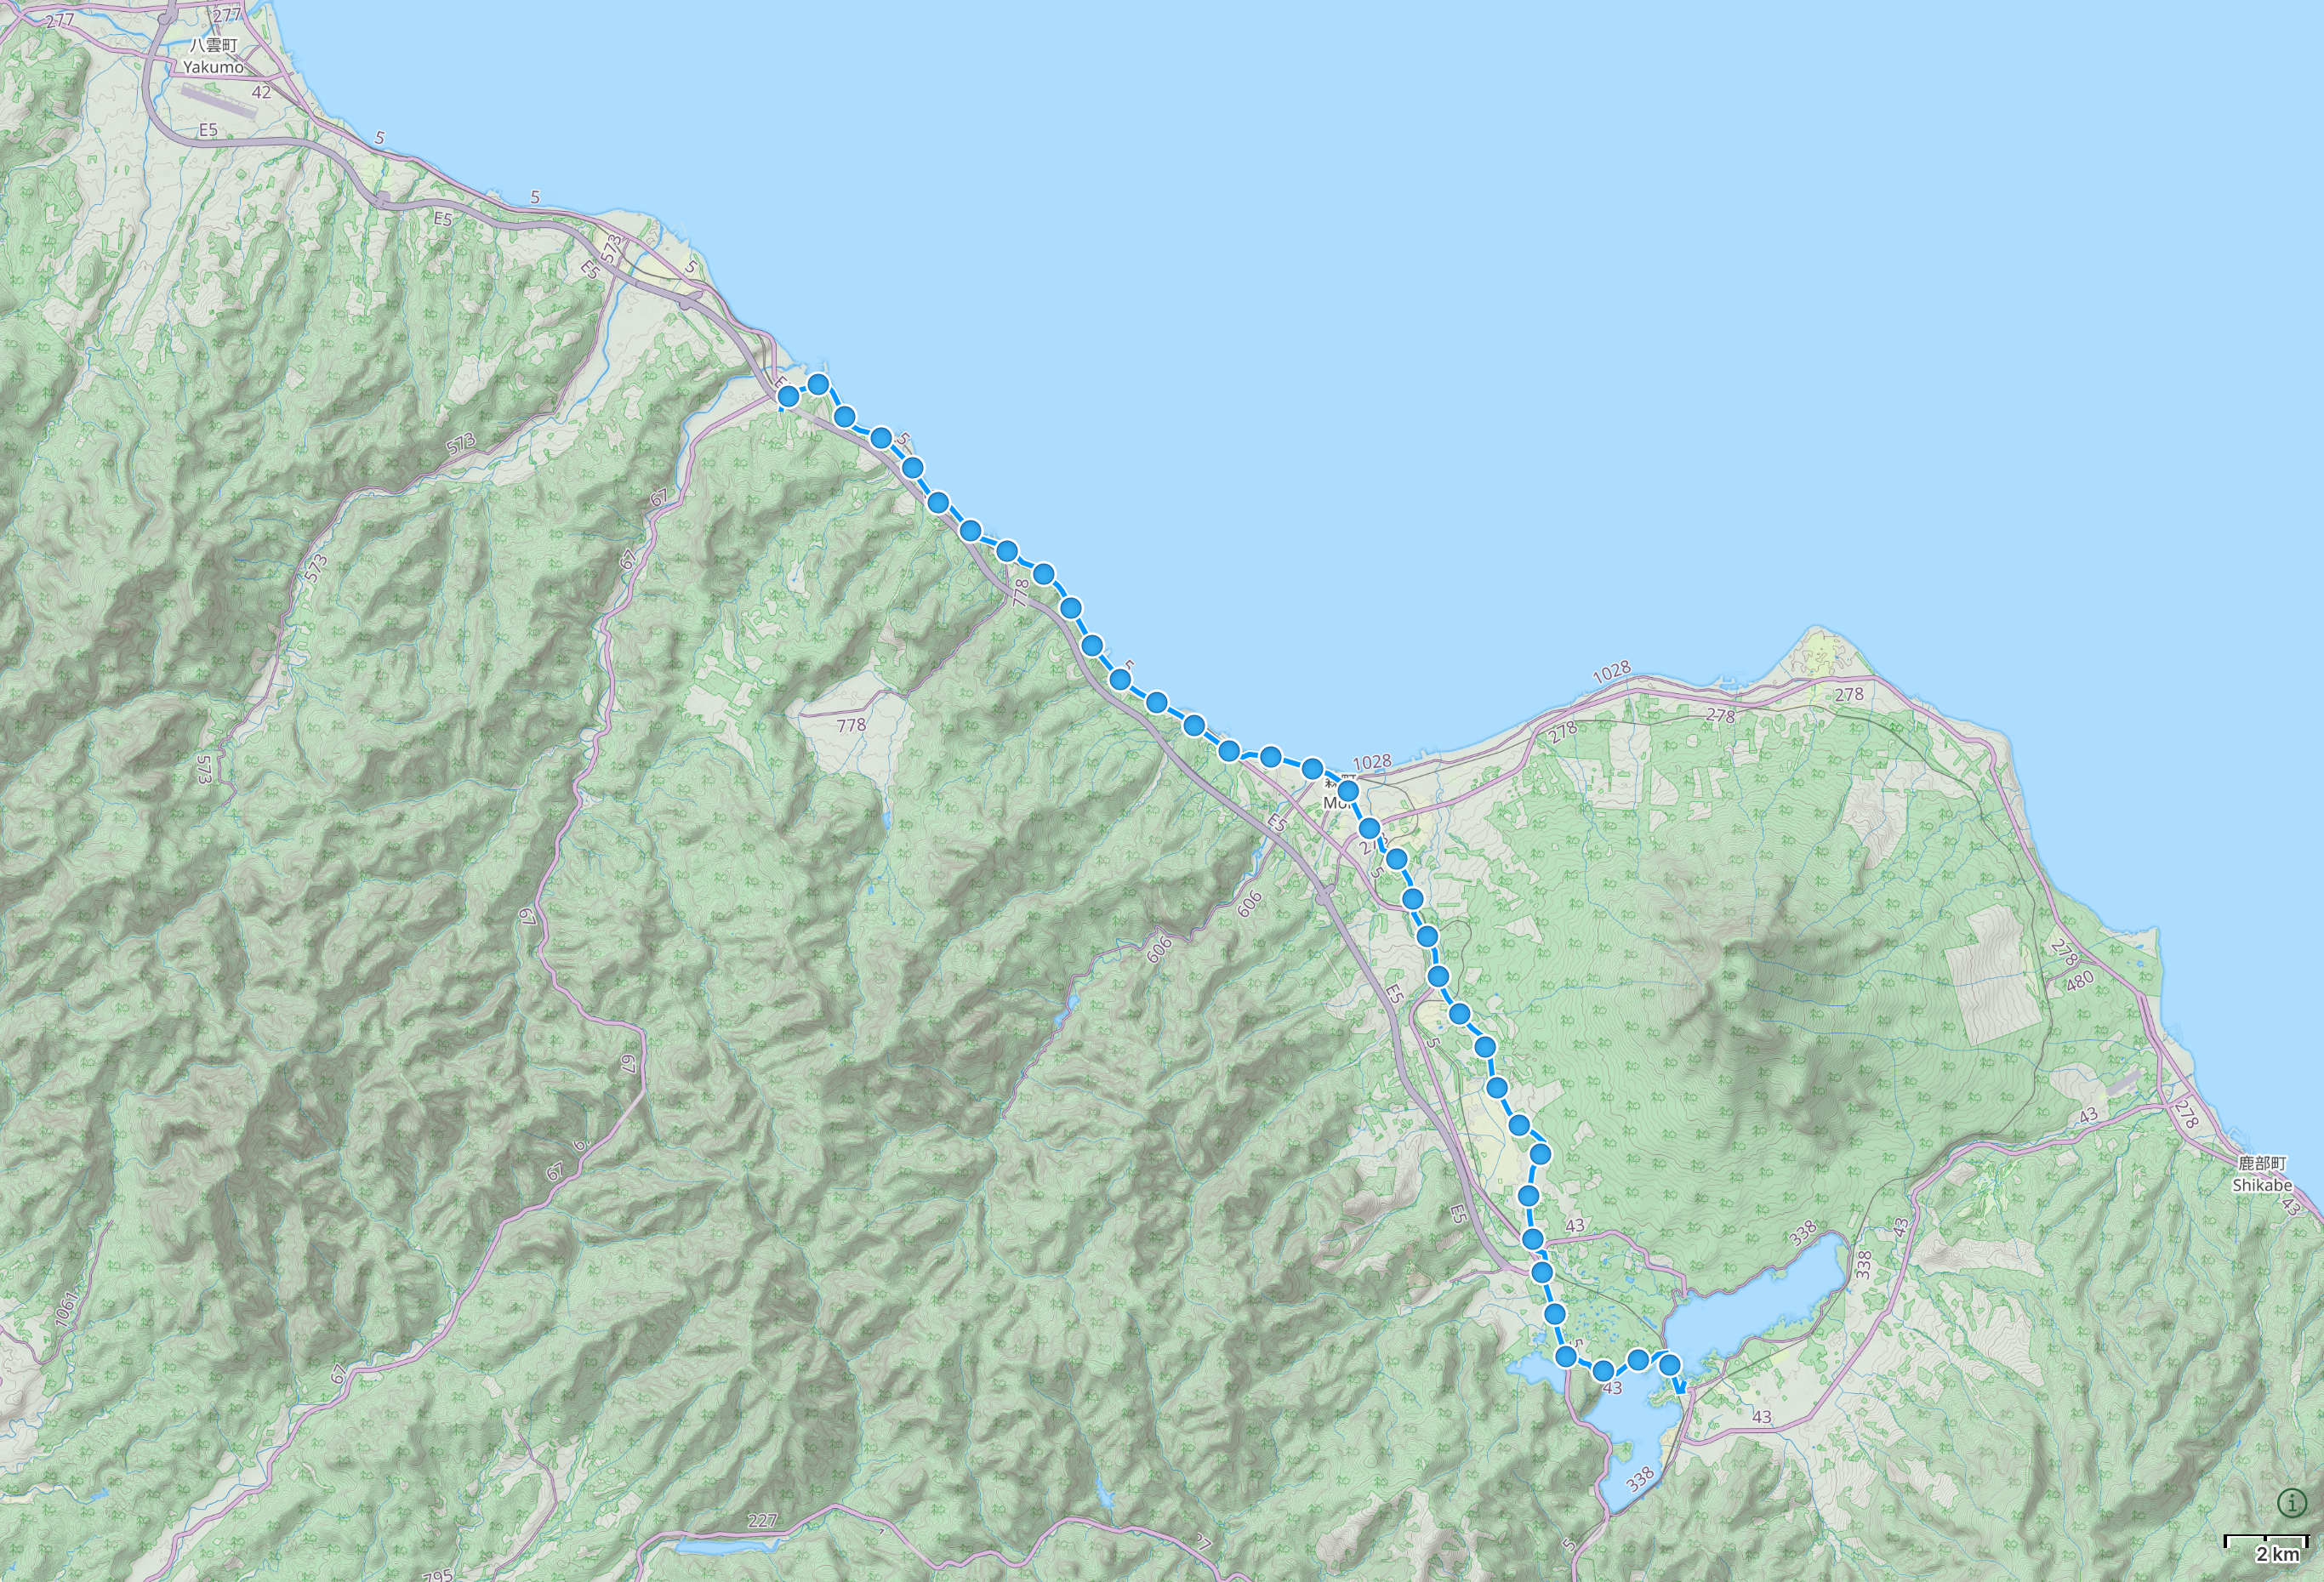 Map of Hokkaido with author’s route from Lake Ōnuma to Otoshibe highlighted.